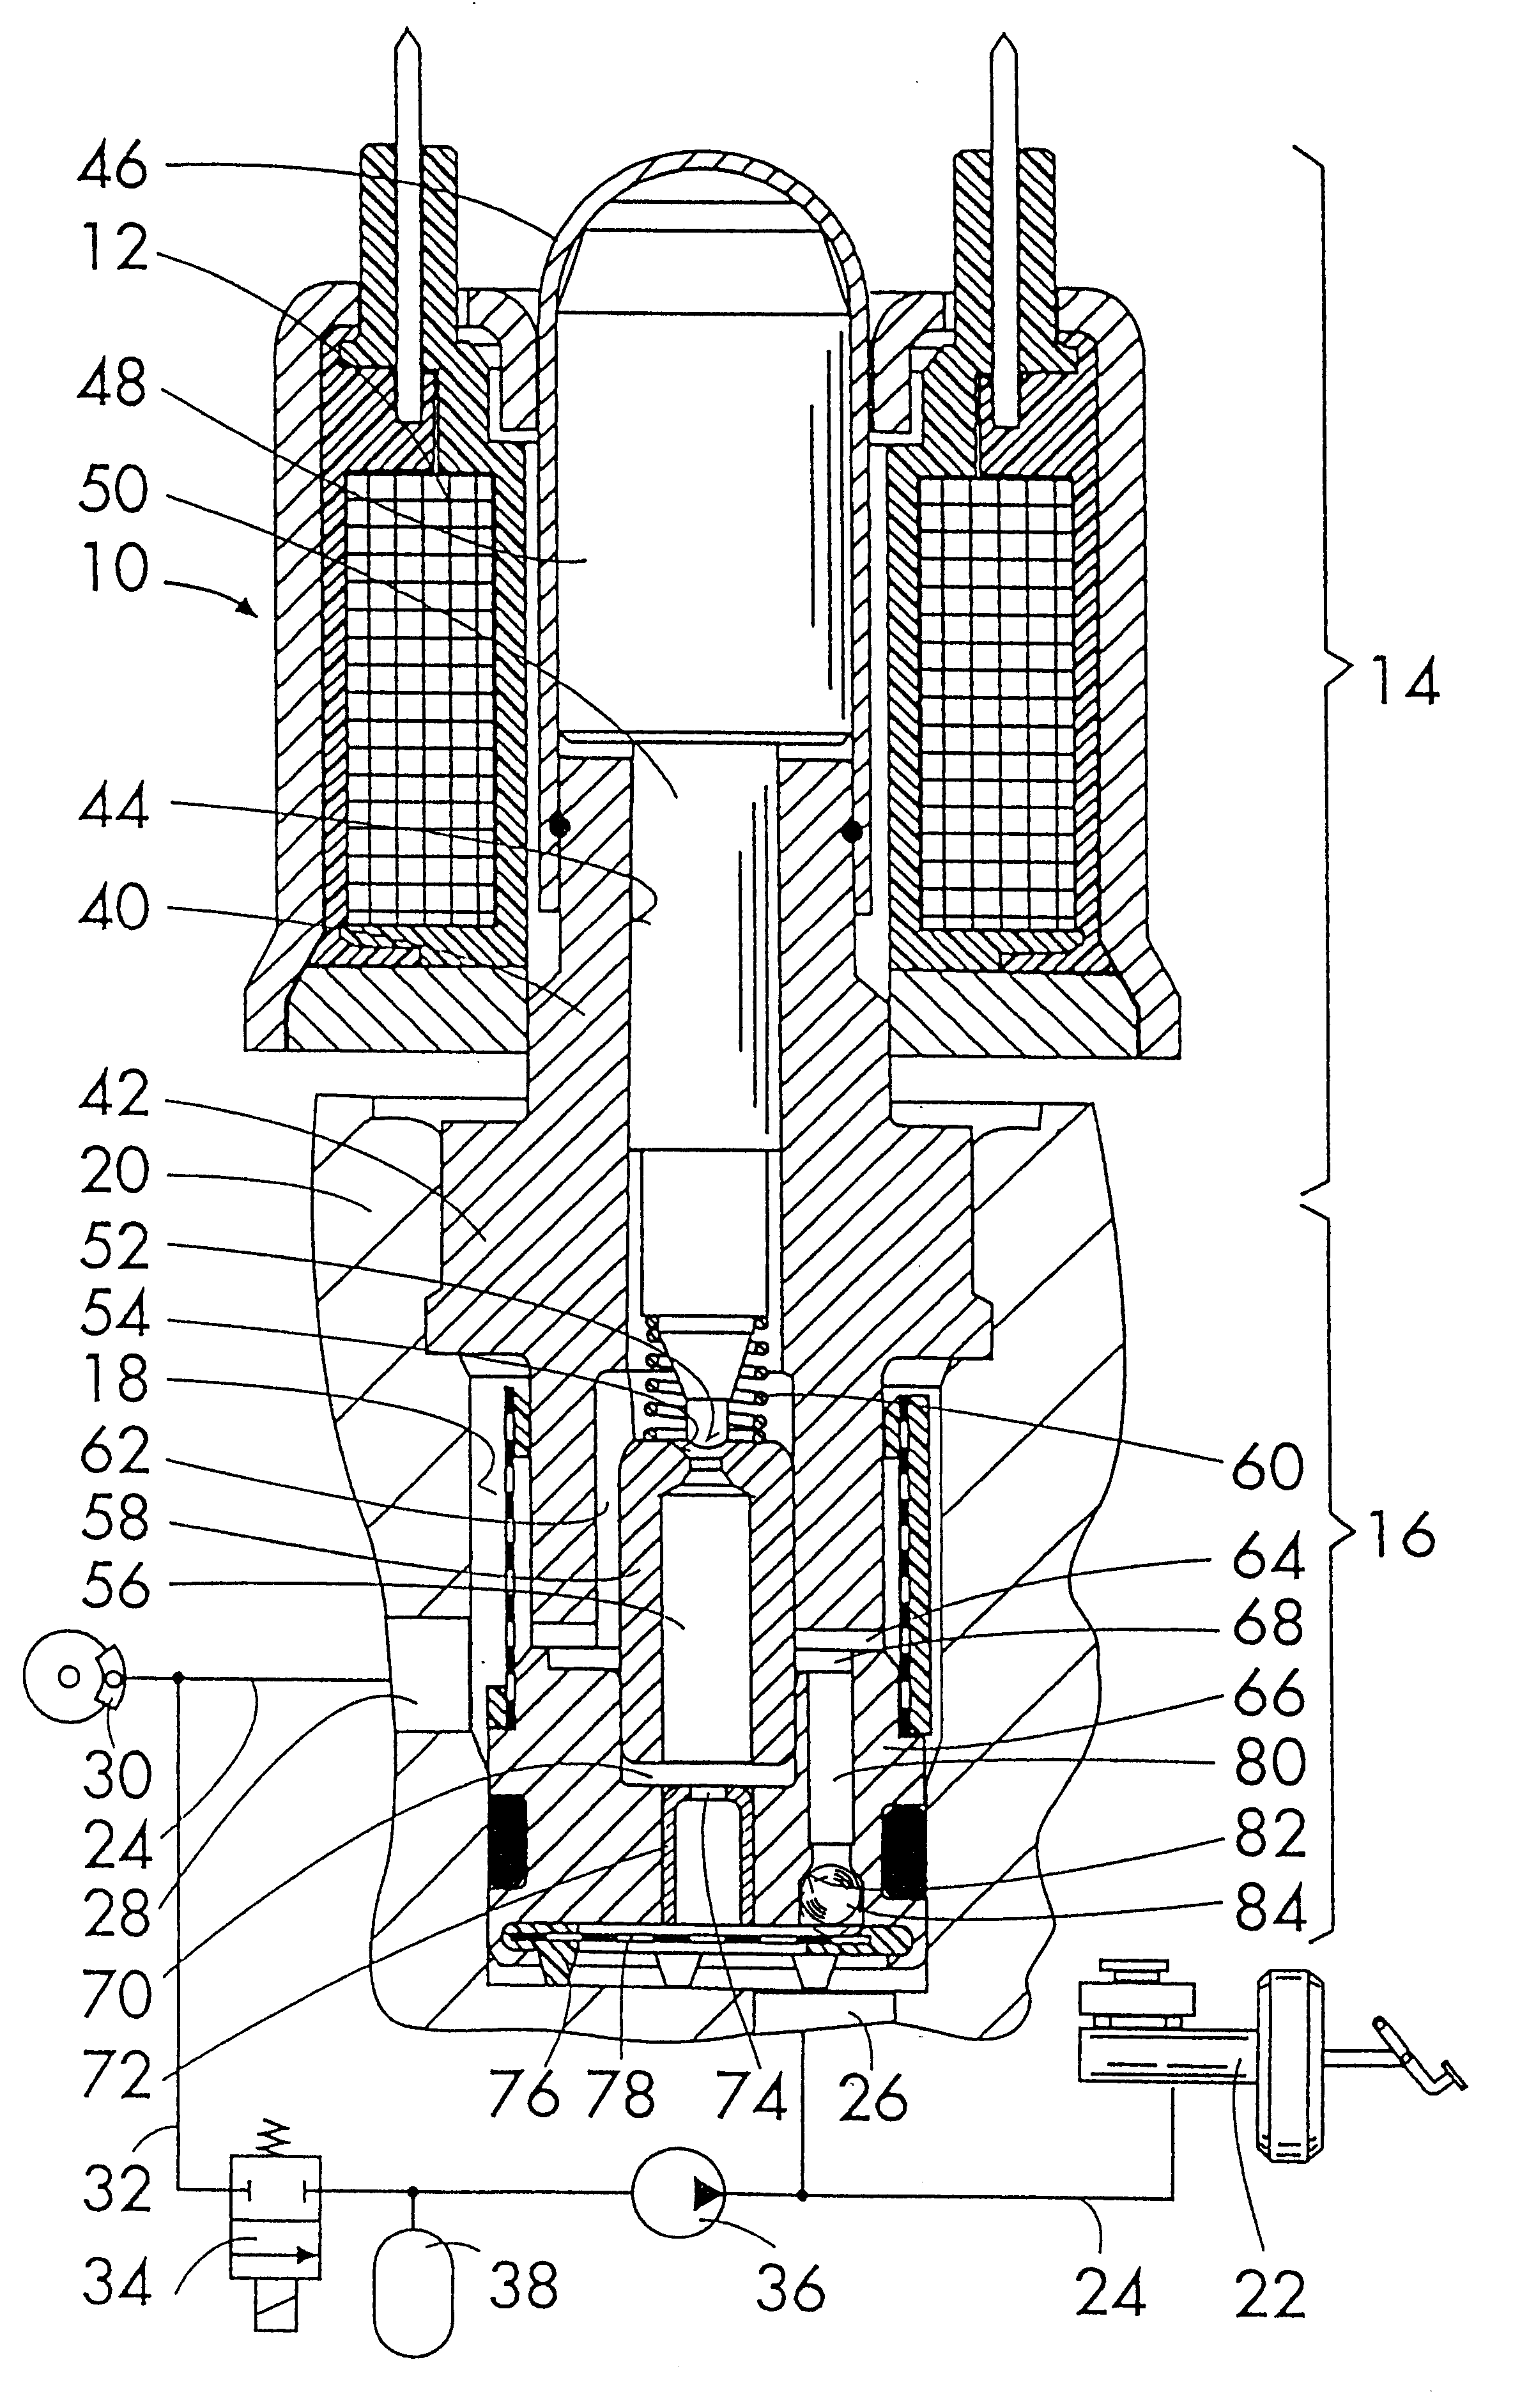 Magnet valve for a slip-controlled hydraulic vehicle brake system